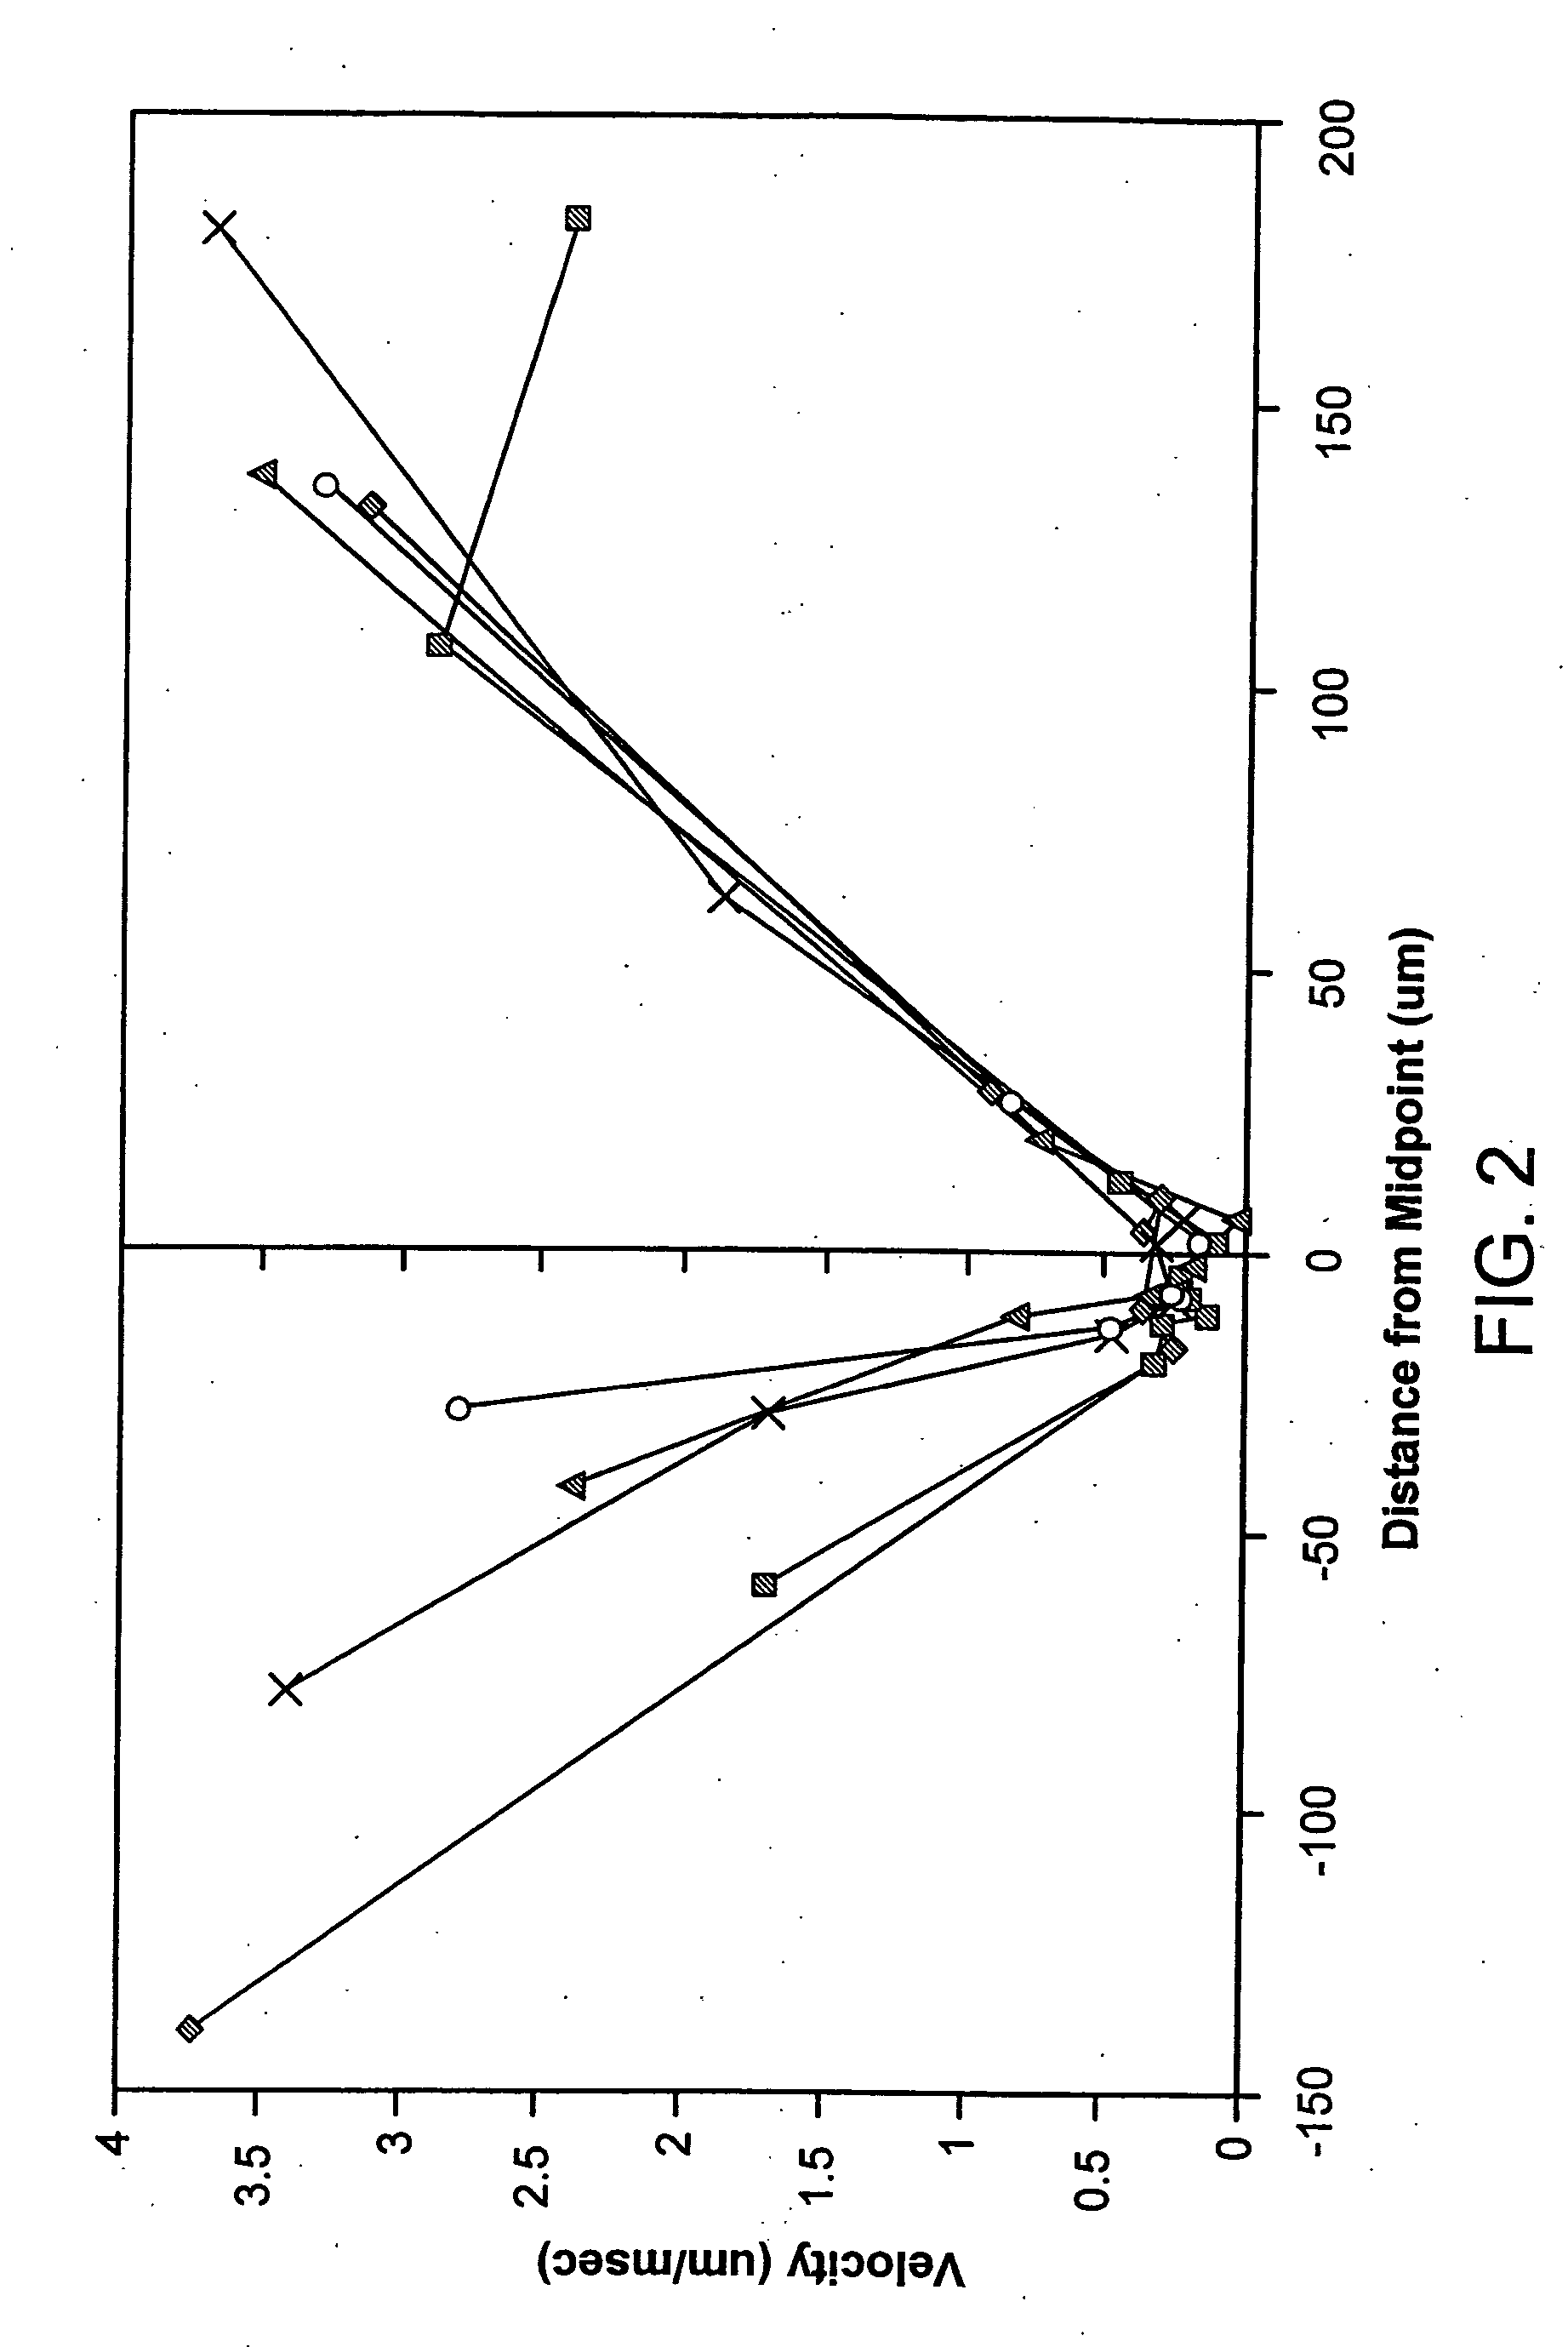 Compounds or agents that inhibit and induce the formation of focal microvessel dilatations